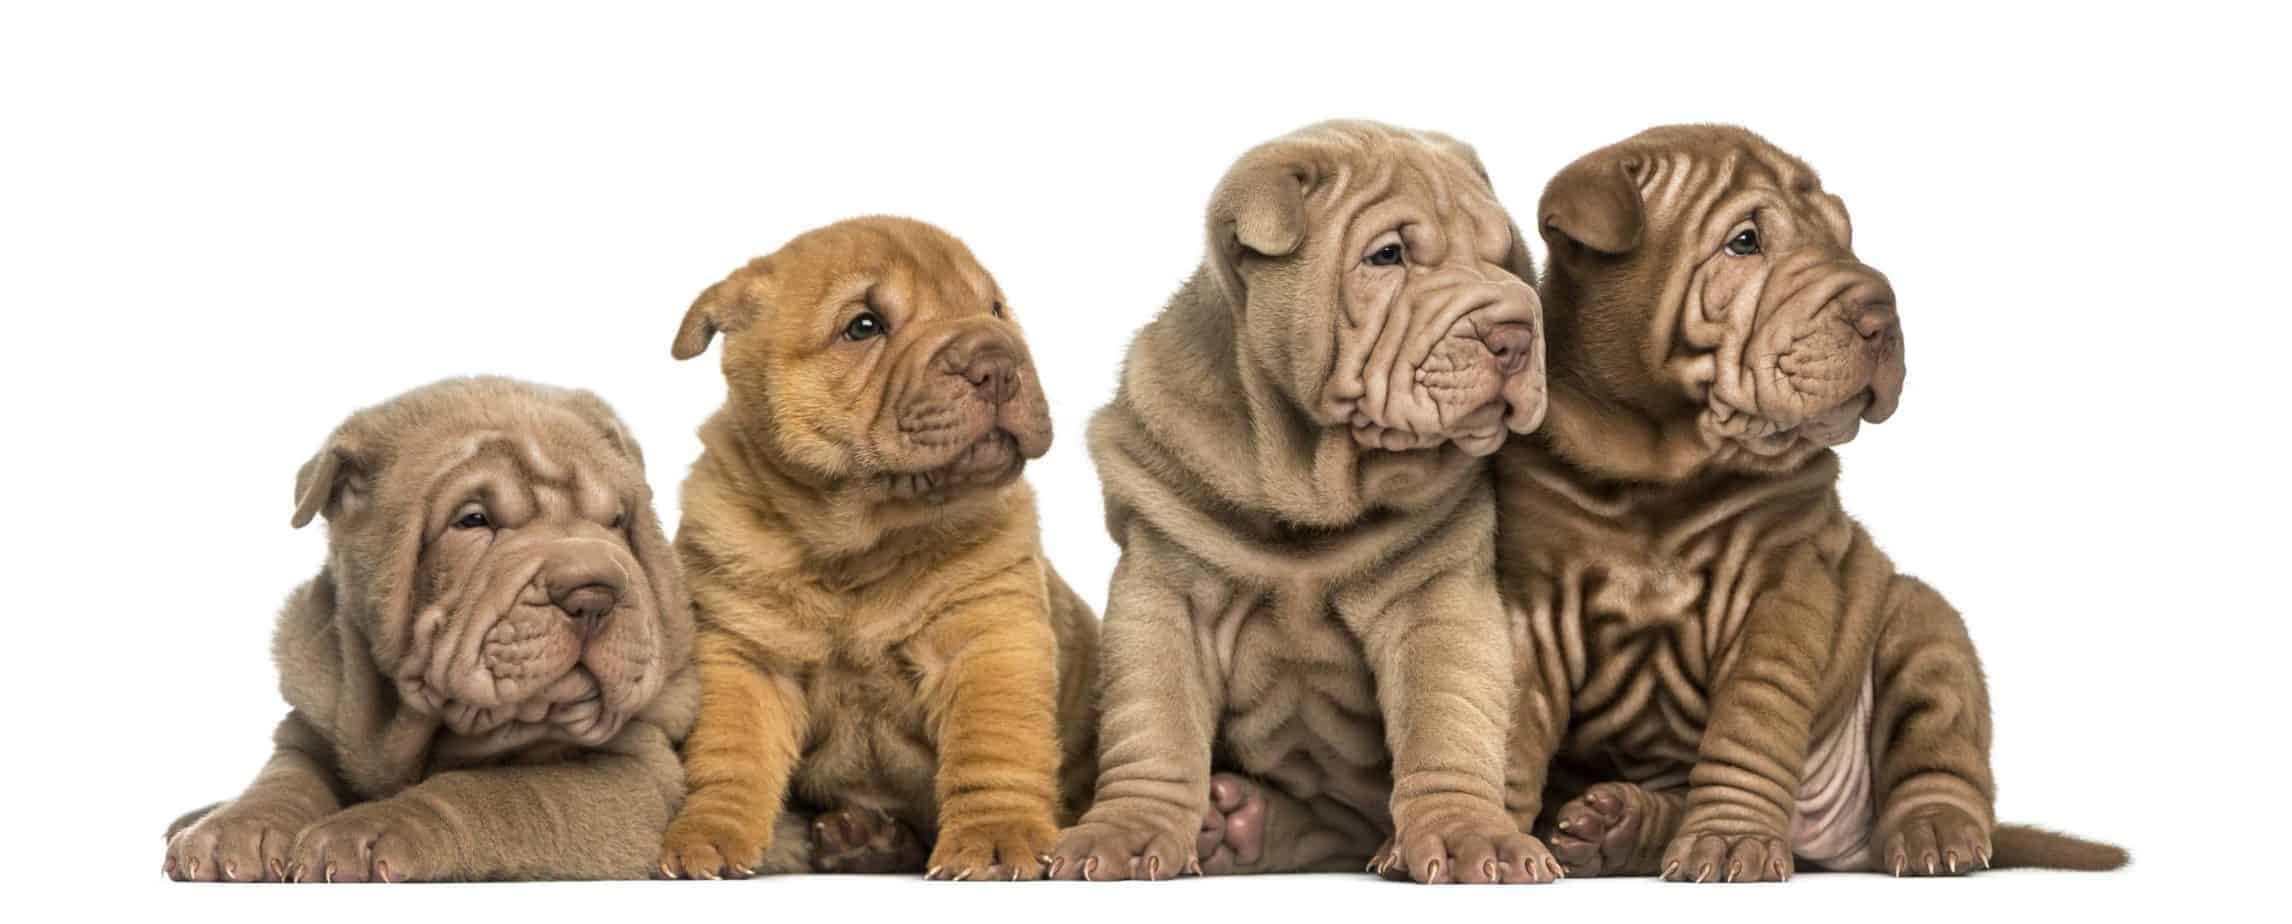 are shar peis good apartment dogs